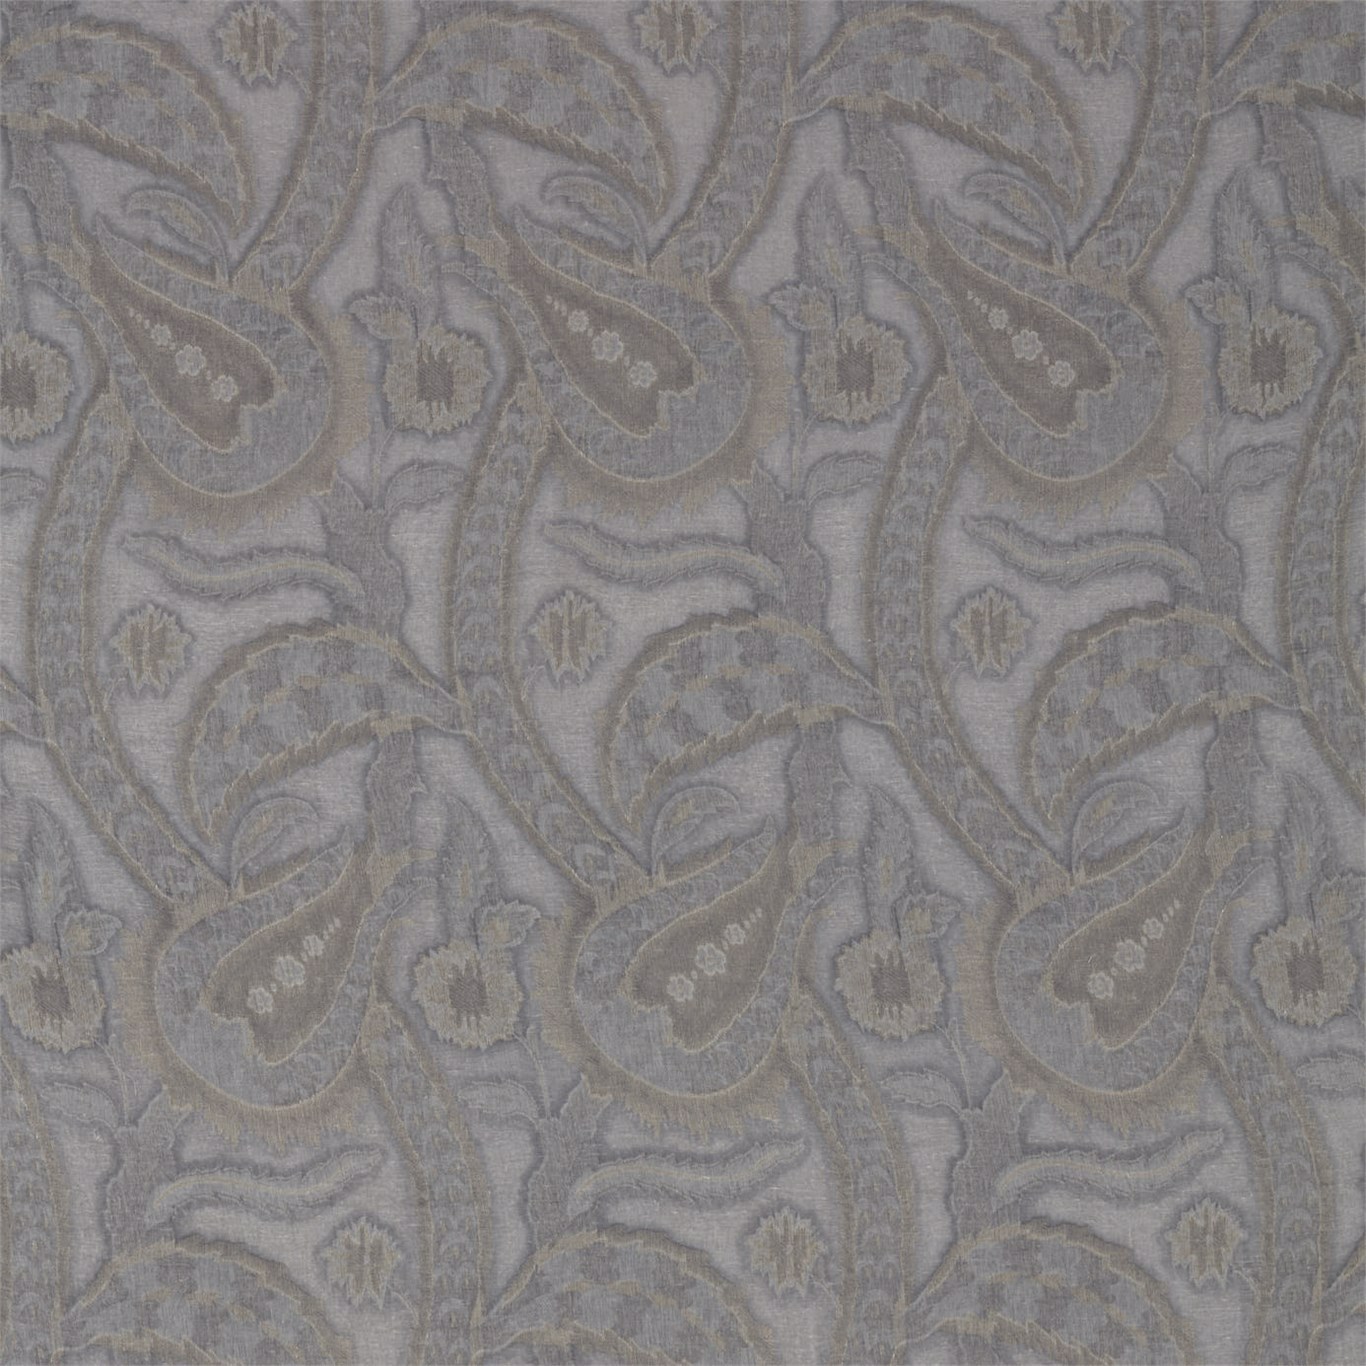 Oberon Anthracite Fabric by ZOF